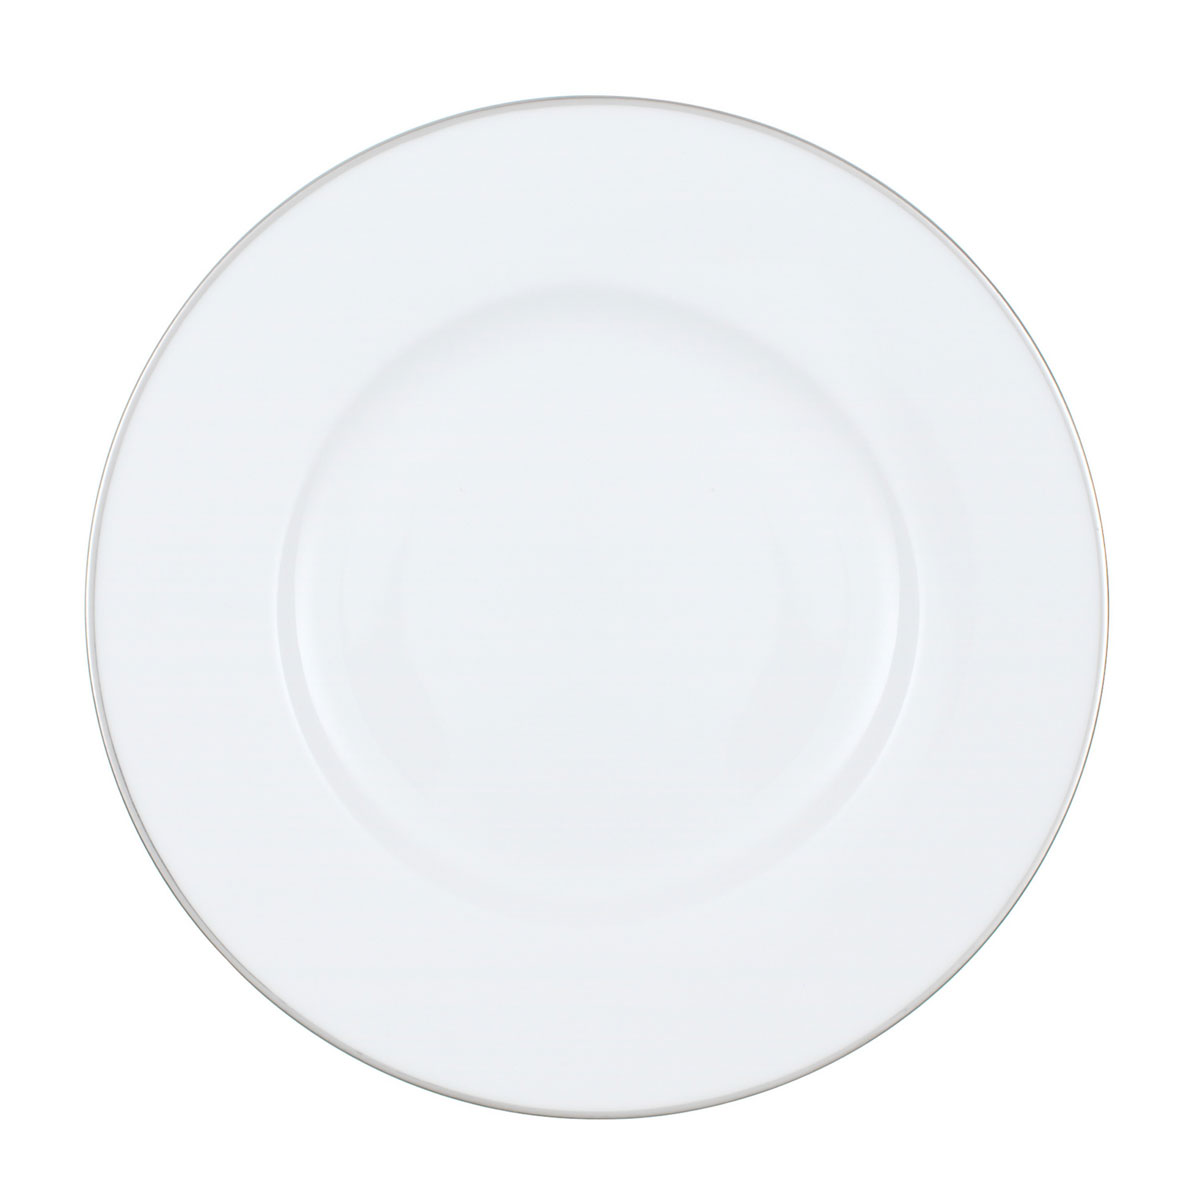 Villeroy and Boch Anmut Platinum No1 Bread and Butter Plate